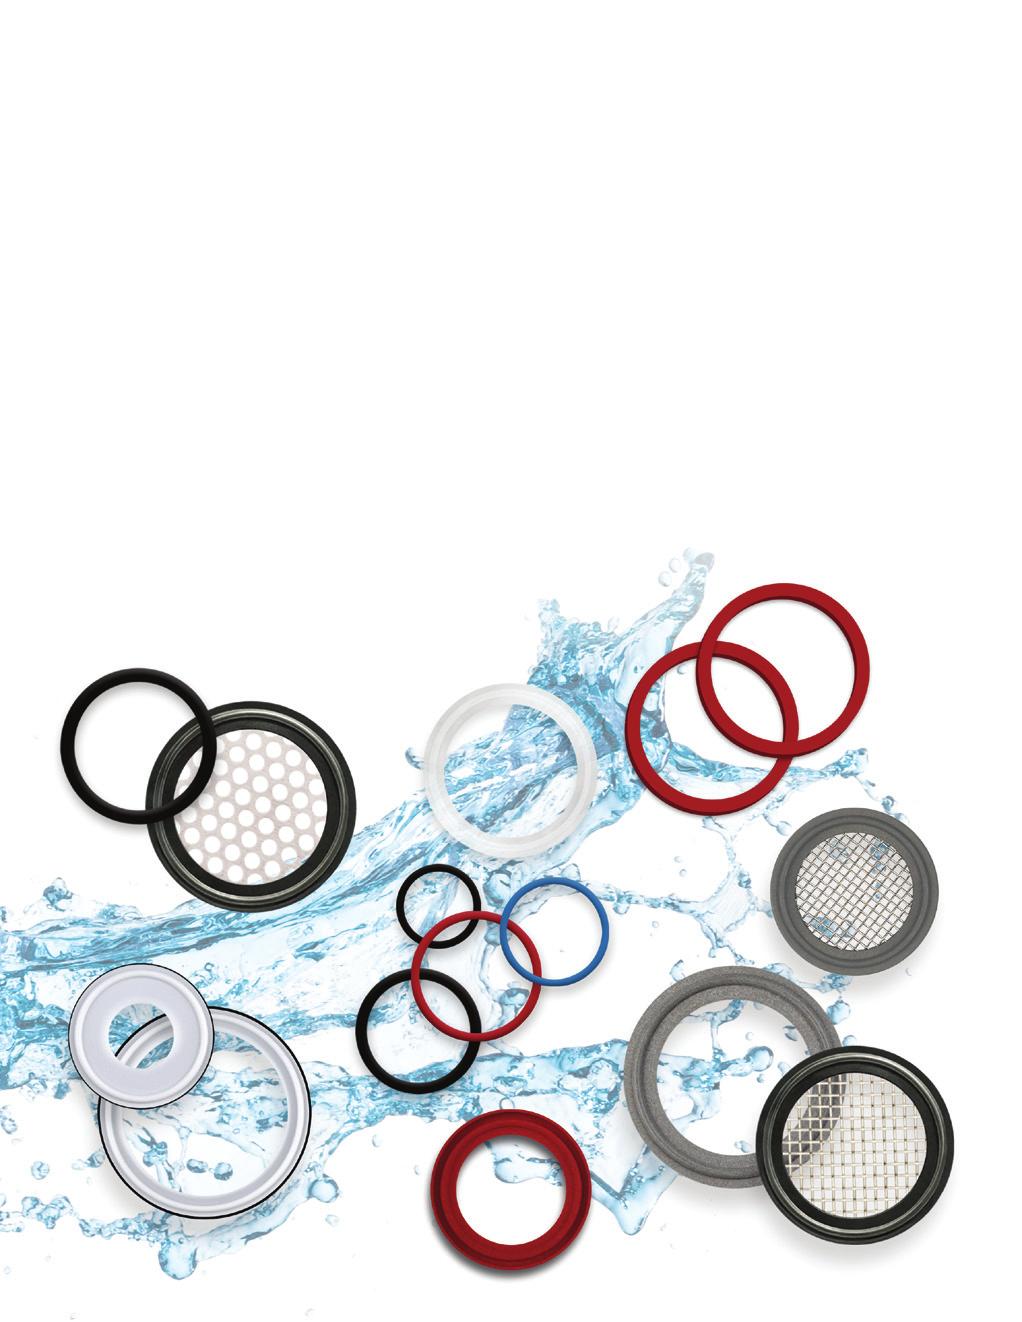 Sanitary Gaskets and O-Rings To enhance our product offering, DSO has expanded it s line of Sanitary Gaskets and O-Rings to service the food, beverage, dairy, and pharmaceutical markets.